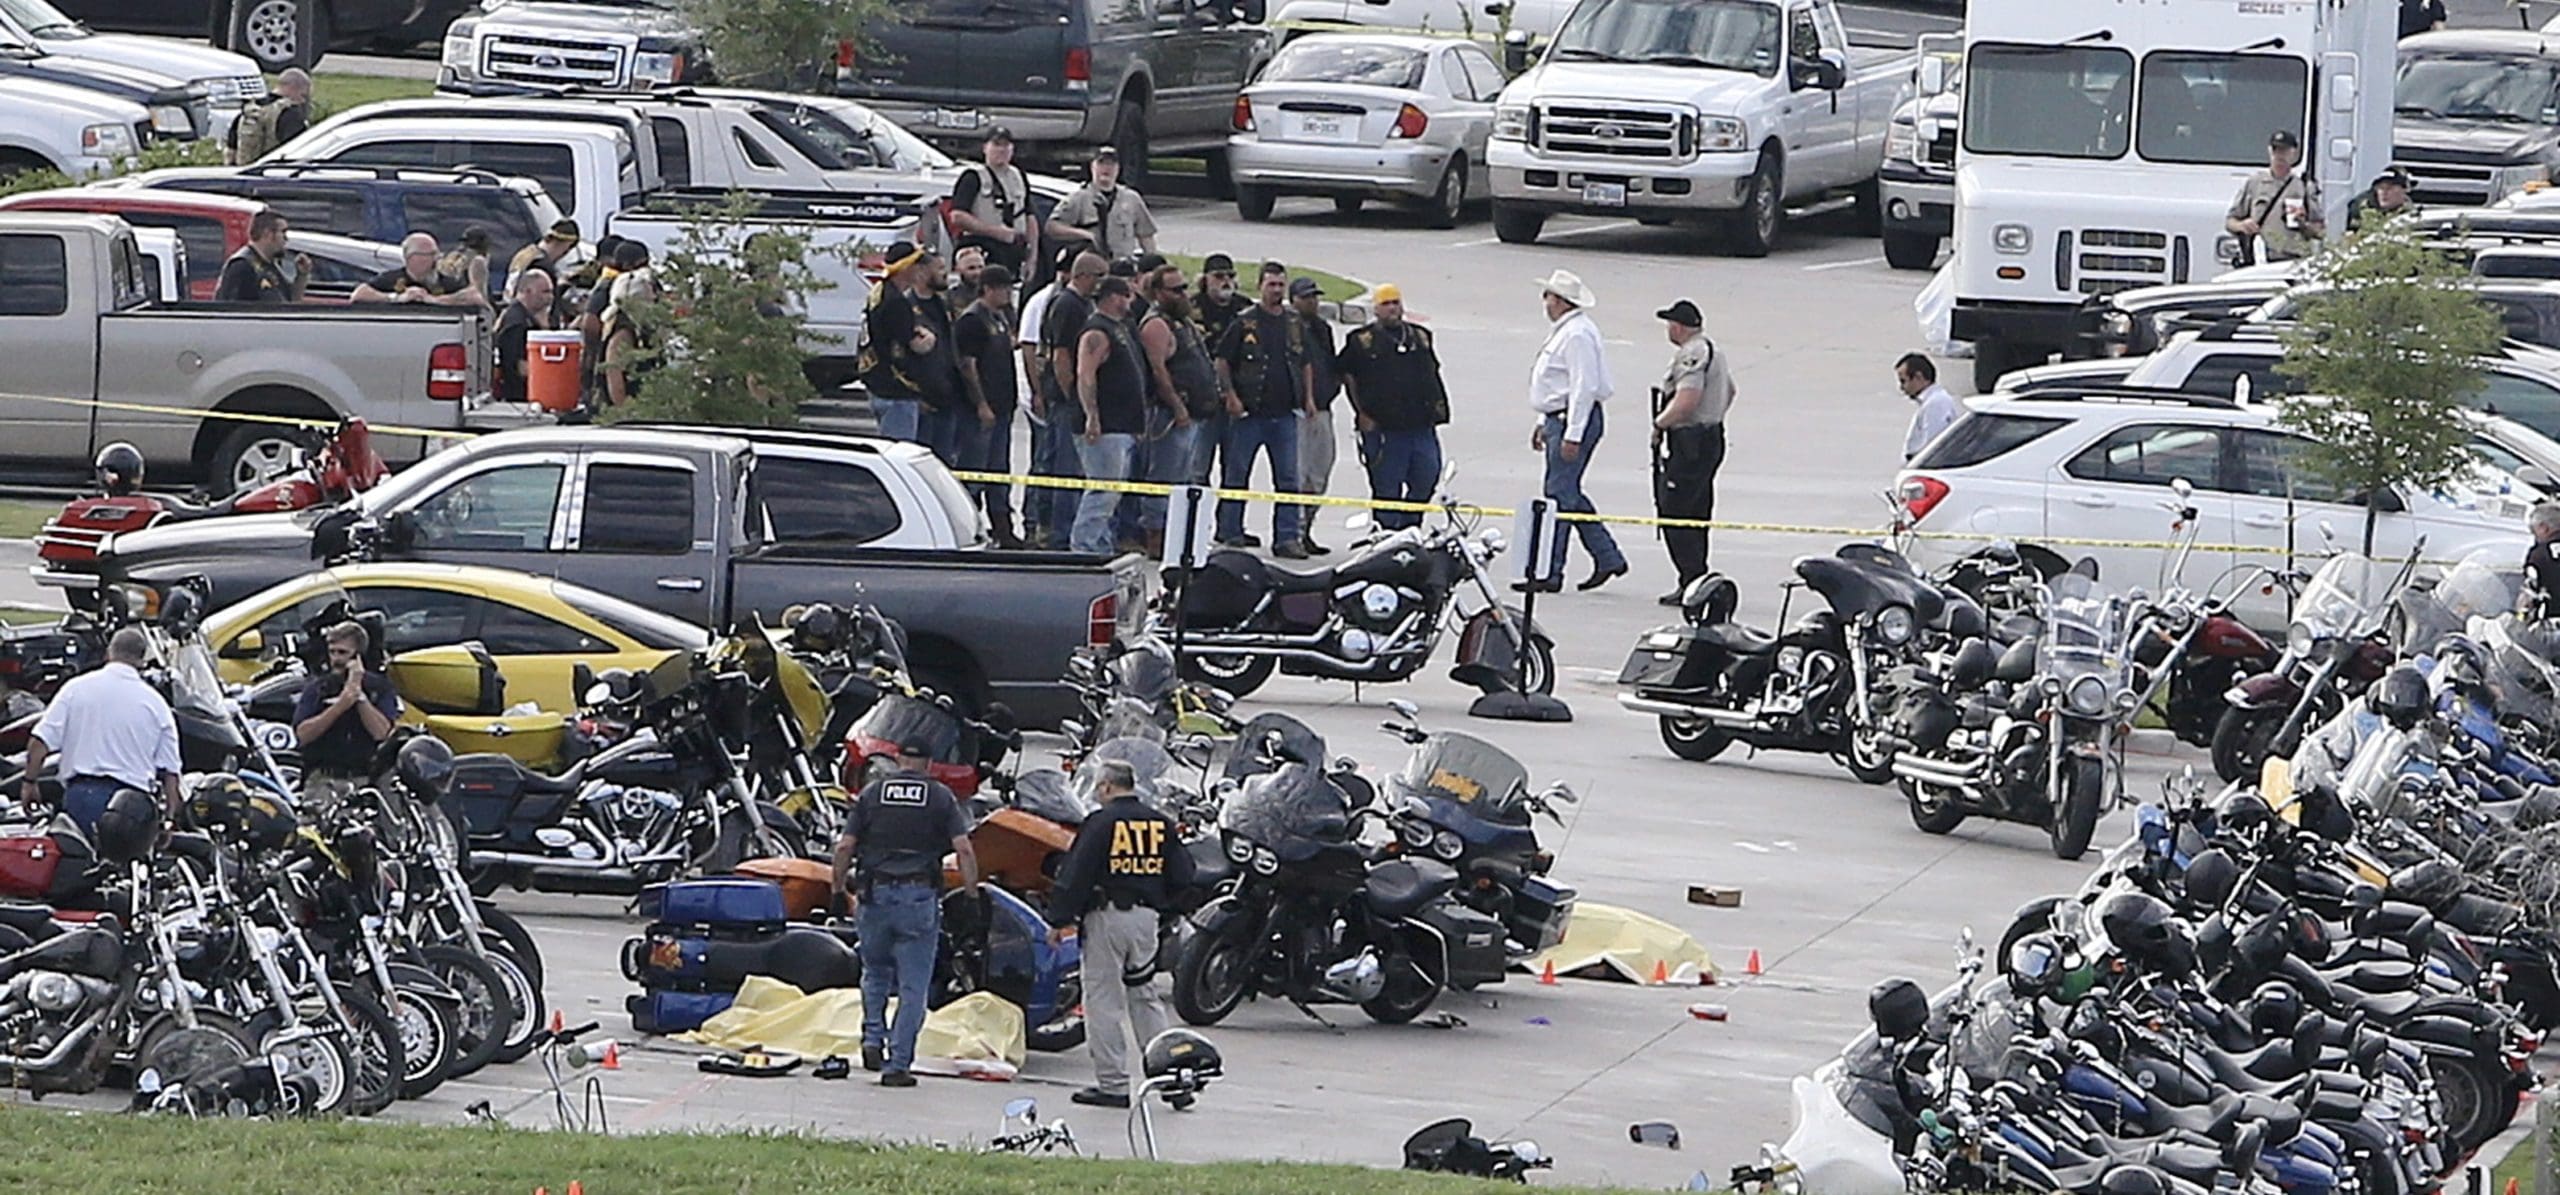 Say What Now? At Least 3 Dead, 5 Injured During Shooting Between Rival Gangs at New Mexico Biker Rally